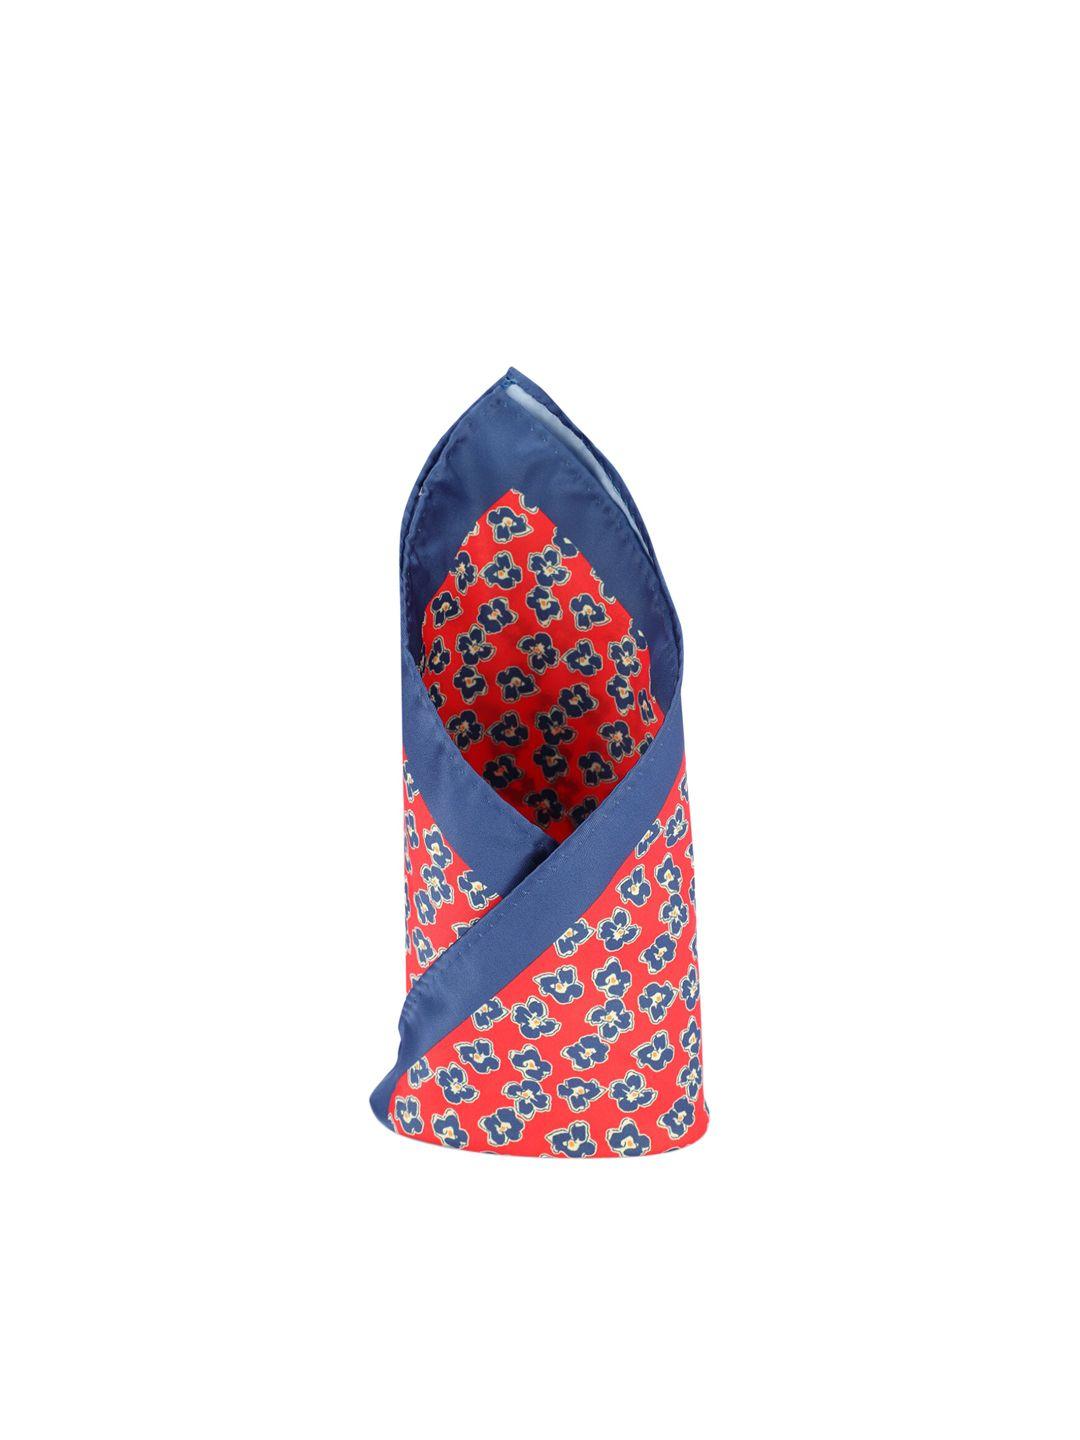 louis philippe men red & blue printed pocket square